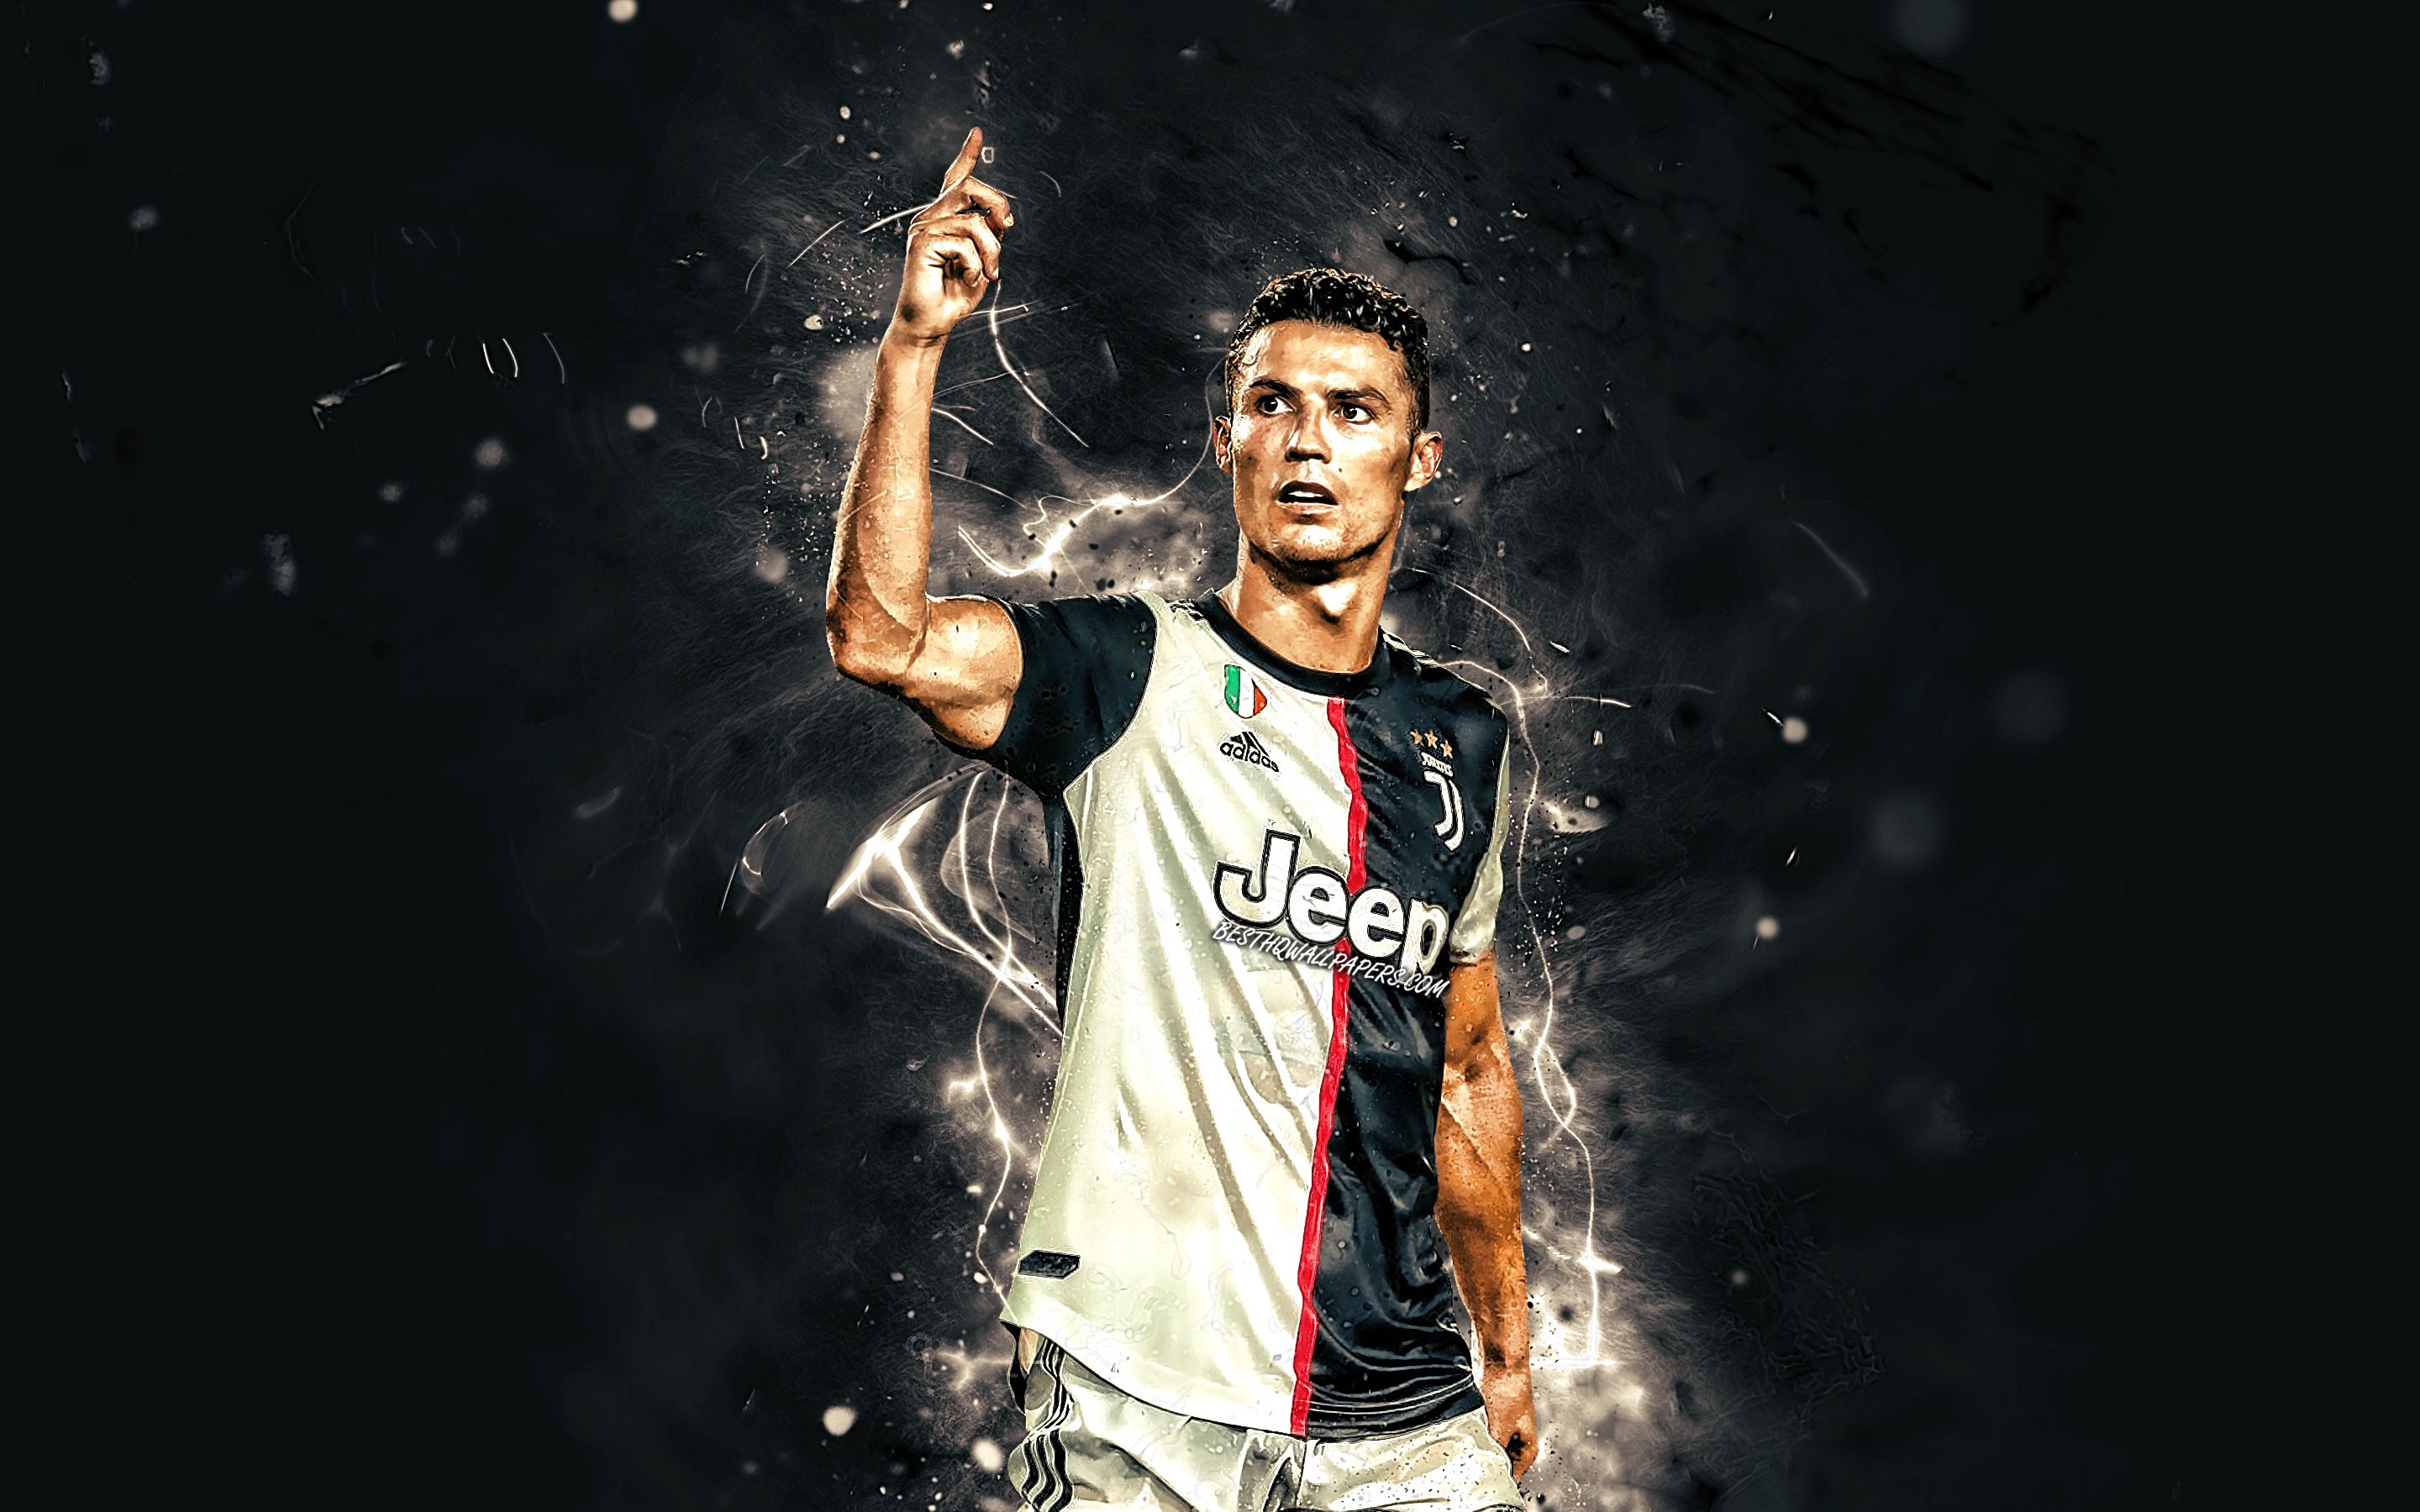 Download wallpaper Cristiano Ronaldo, Juventus FC, goal, CR new uniform, portuguese footballers, Italy, CR7 Juve, Bianconeri, football stars, Serie A, neon lights, soccer for desktop with resolution 2880x1800. High Quality HD